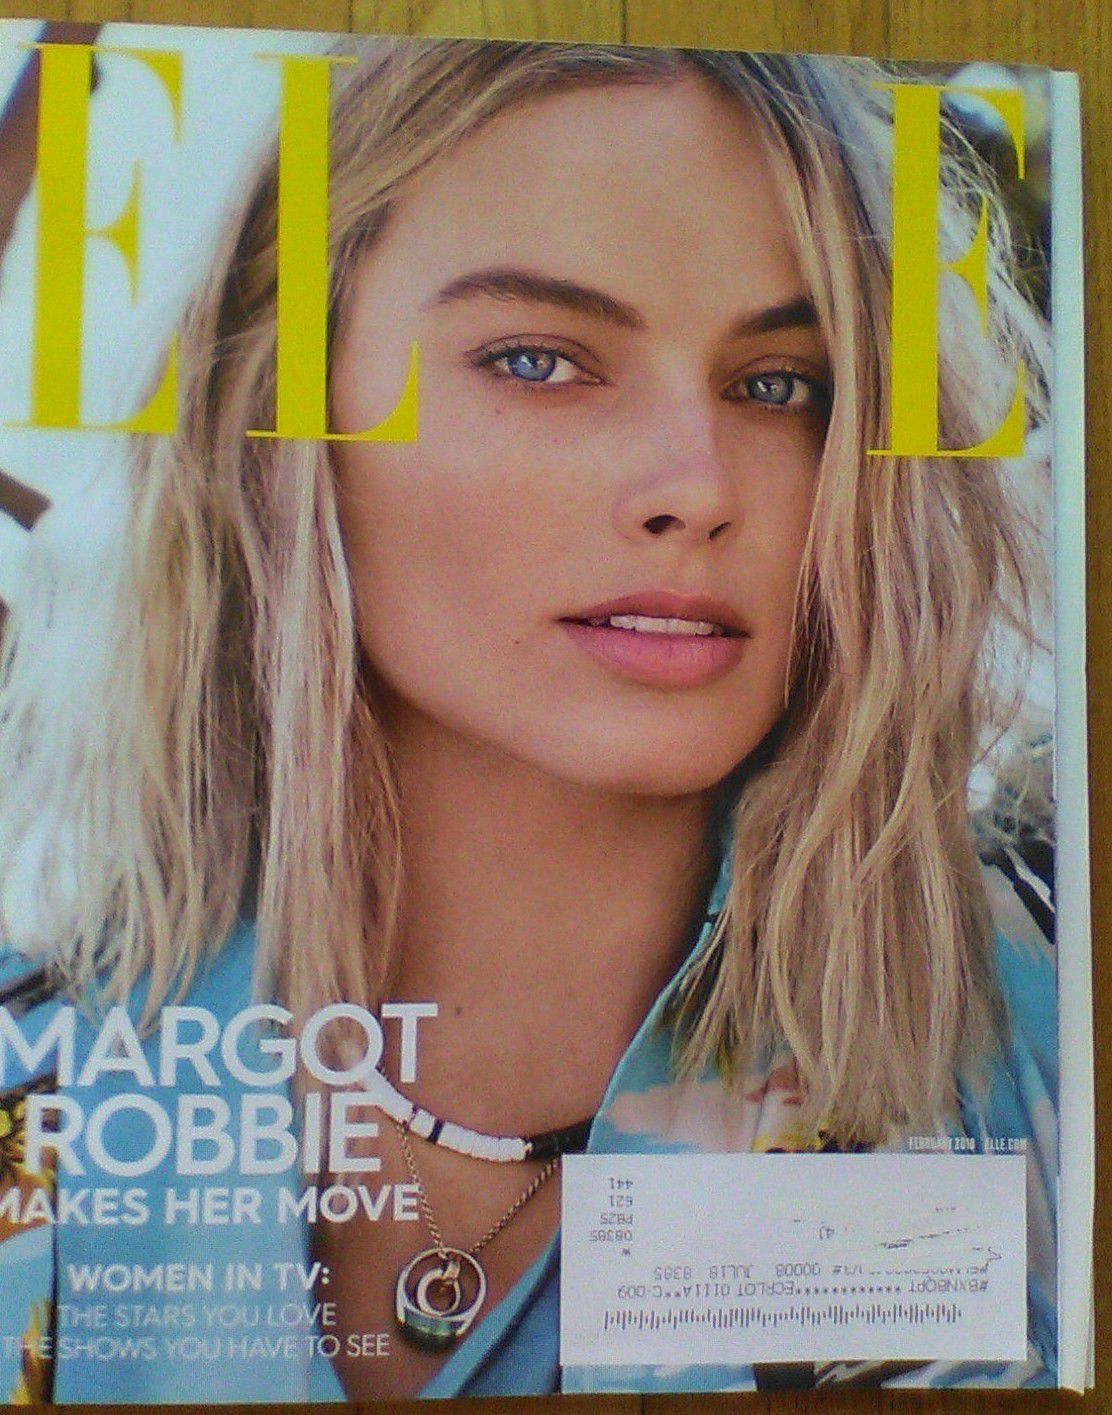 ELLE MAGAZINE February 2018 with MARGOT ROBBIE on cover never read.